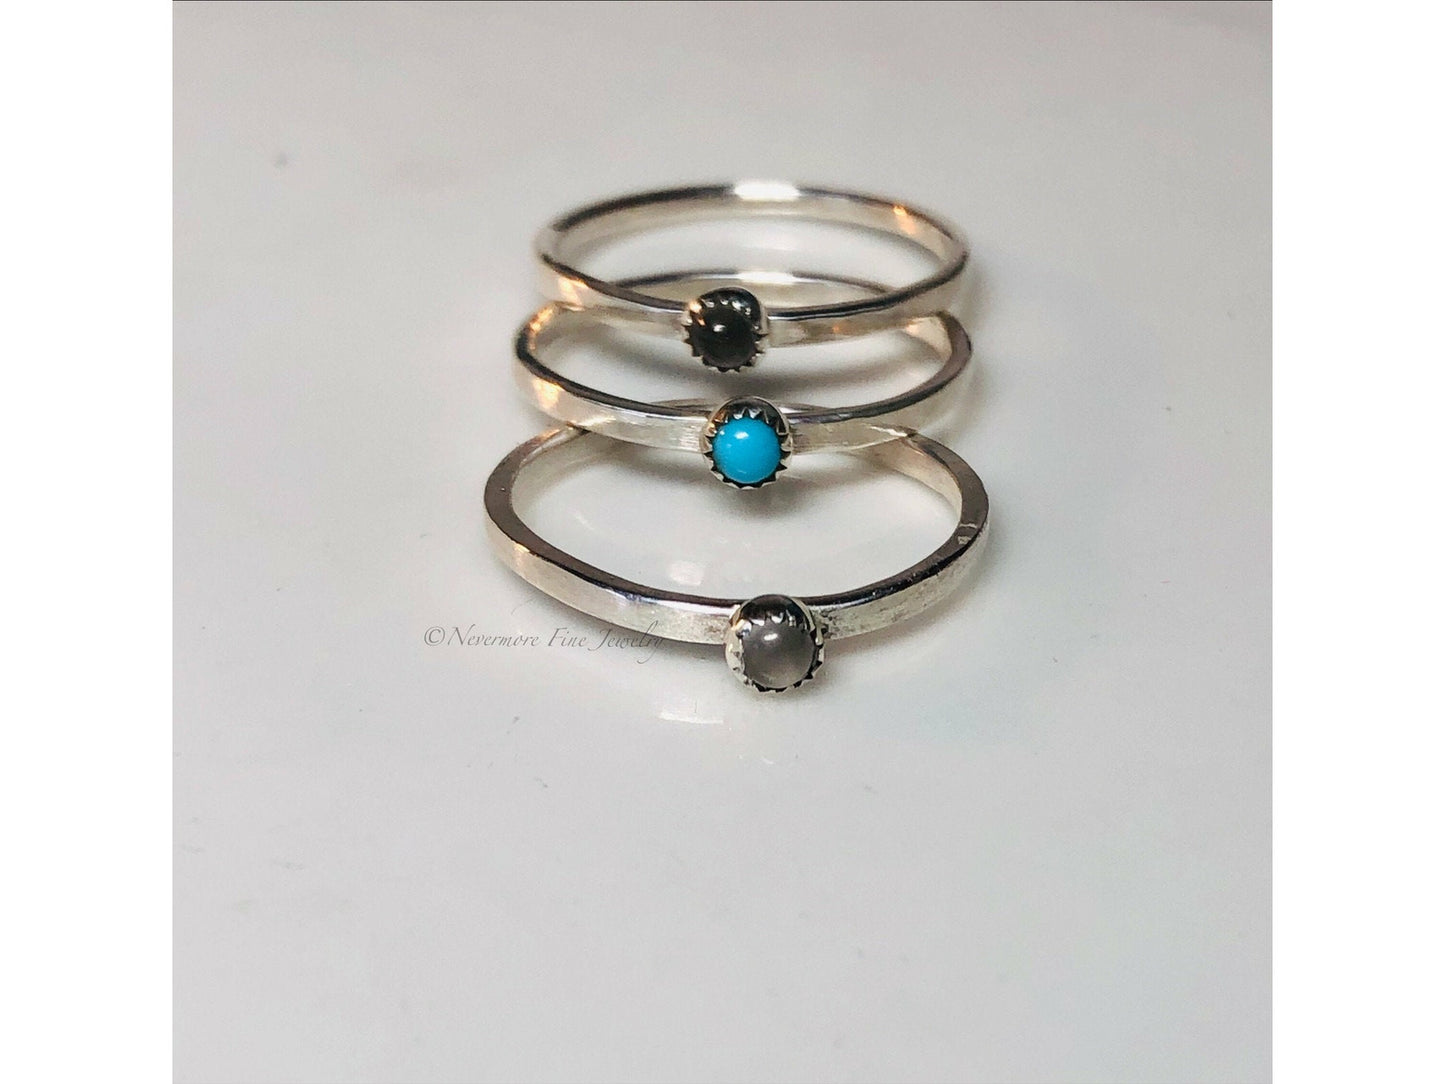 sterling-silver-birthstone-rings-stackable-rings-sterling-silver-dainty-ring-dainty-ring-gemstone-rings-minimalist-stacking-rings